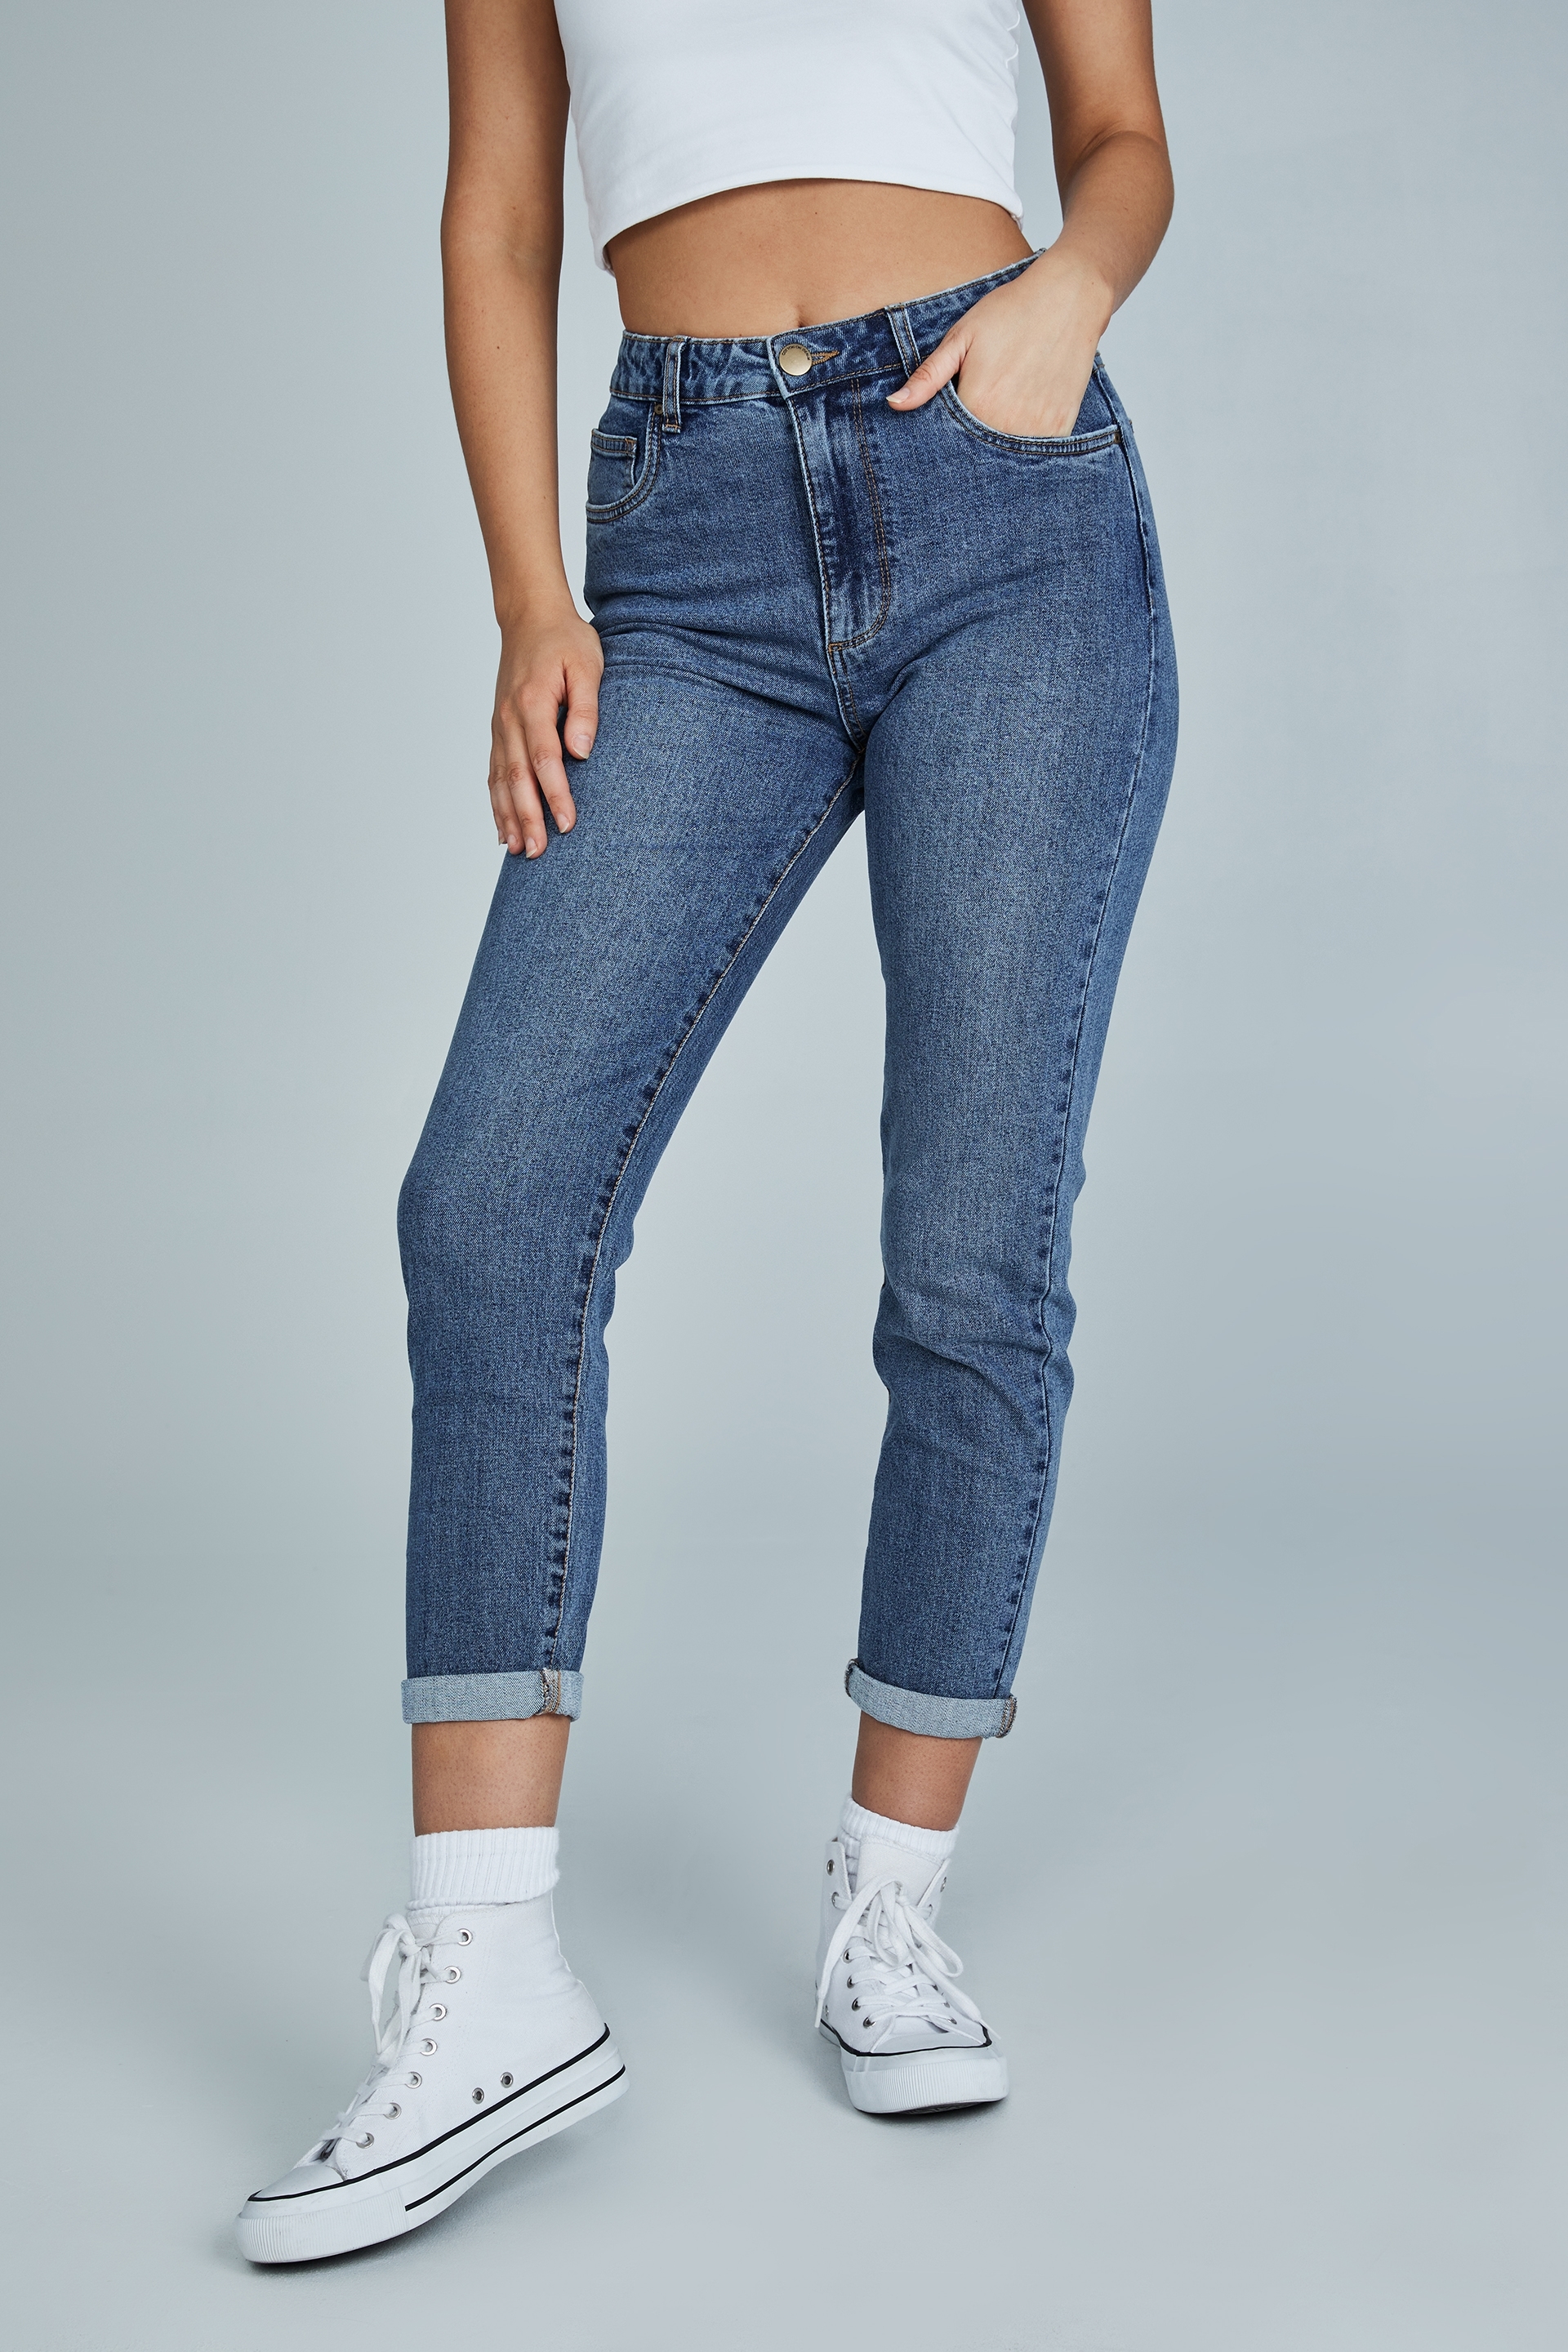 Cotton On Women - Stretch Mom Jean - Lucky blue